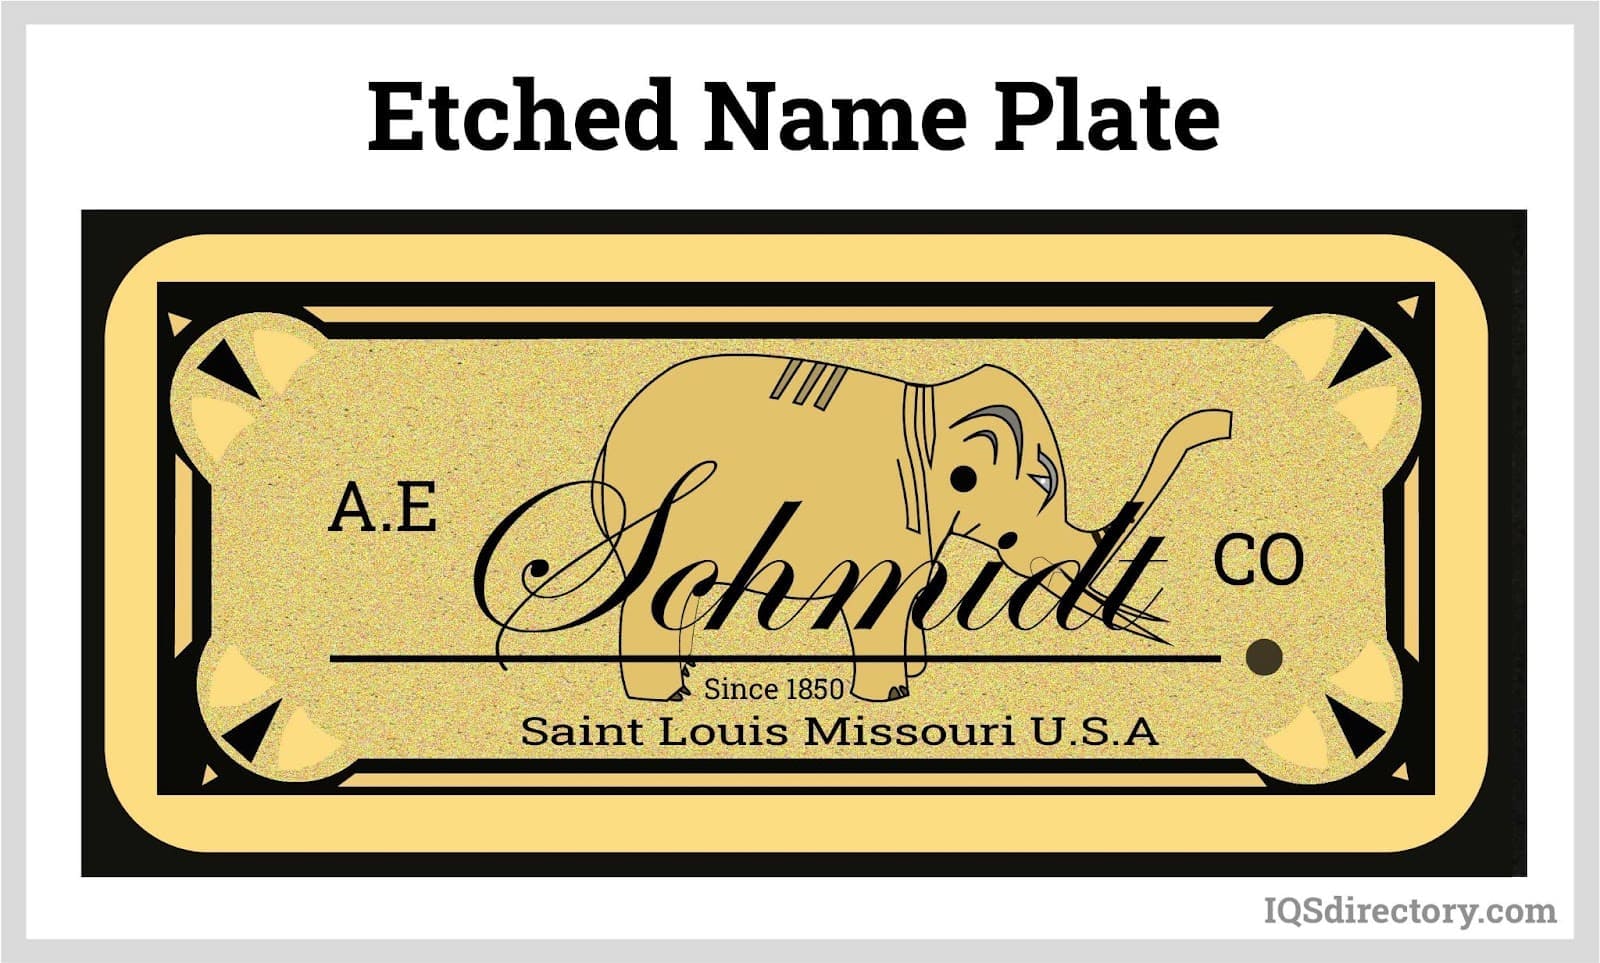 Etched Name Plate